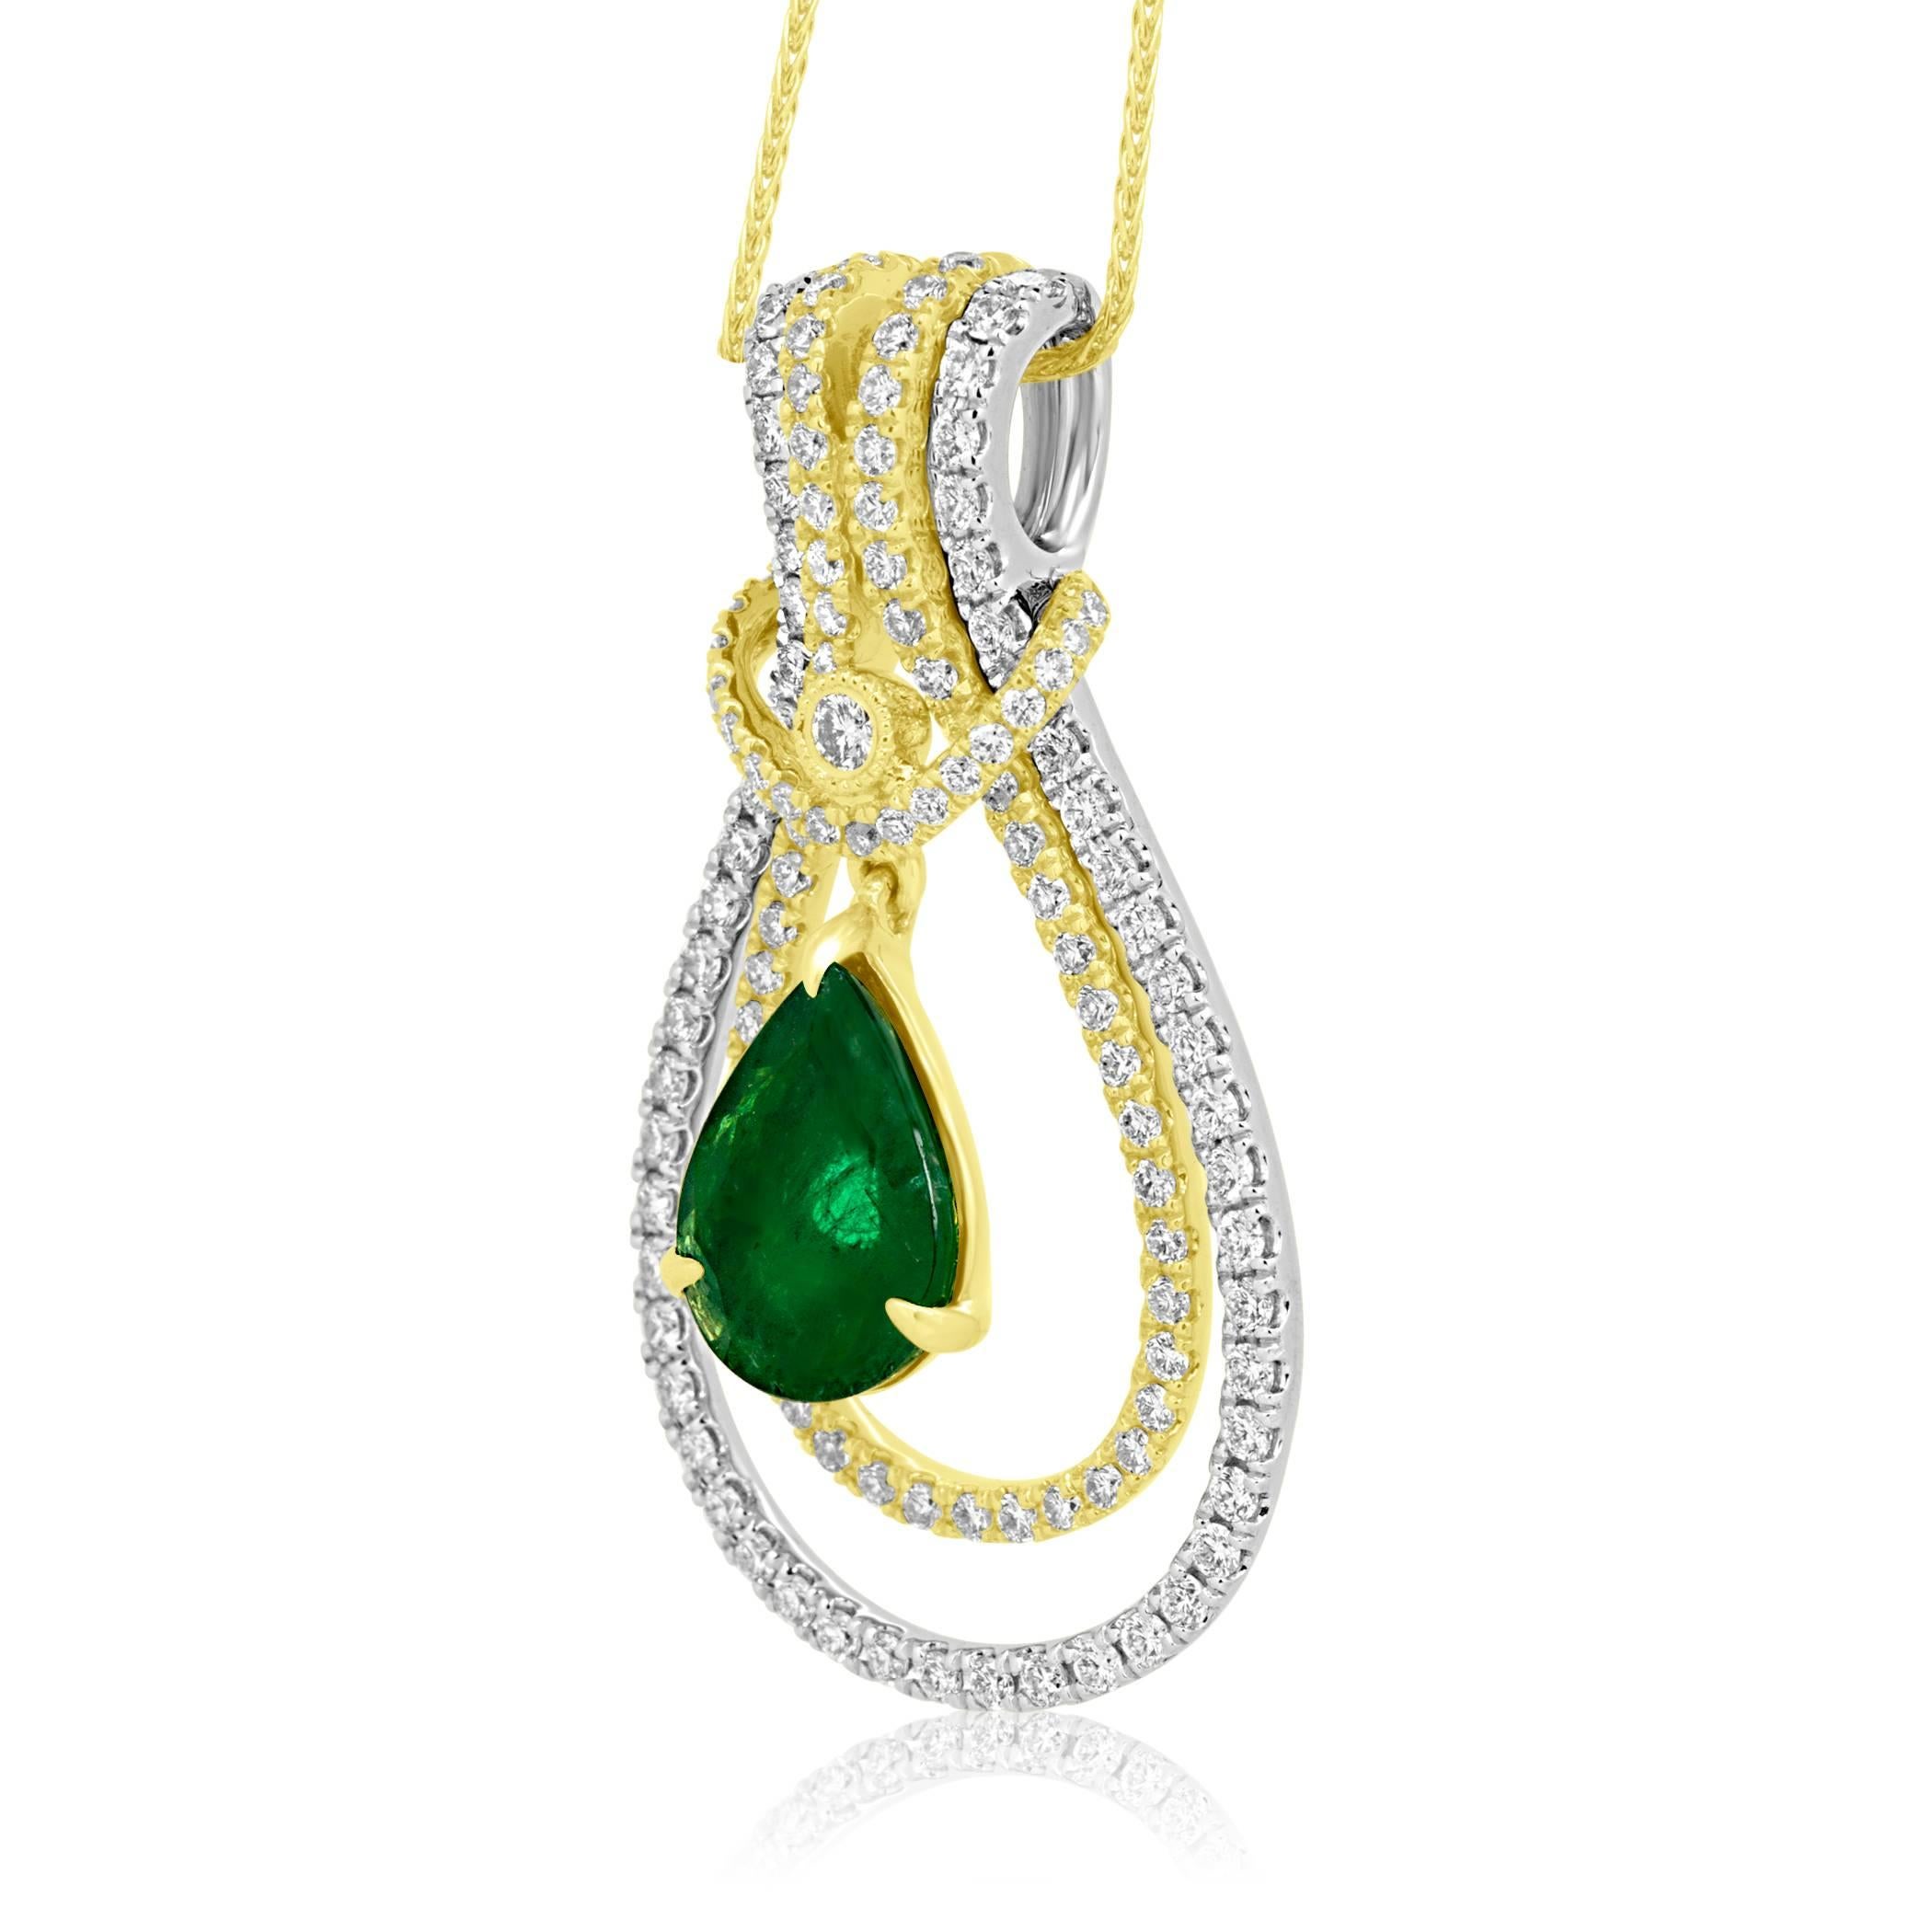 1 Emerald Pearshape 2.93 Carat White Diamond Round 1.16 Carat Interchangeable Pendent can be worn three ways as three pendents in 18K White and yellow Gold comes with Italian Spiga adjustable 18K Yellow Gold chain.